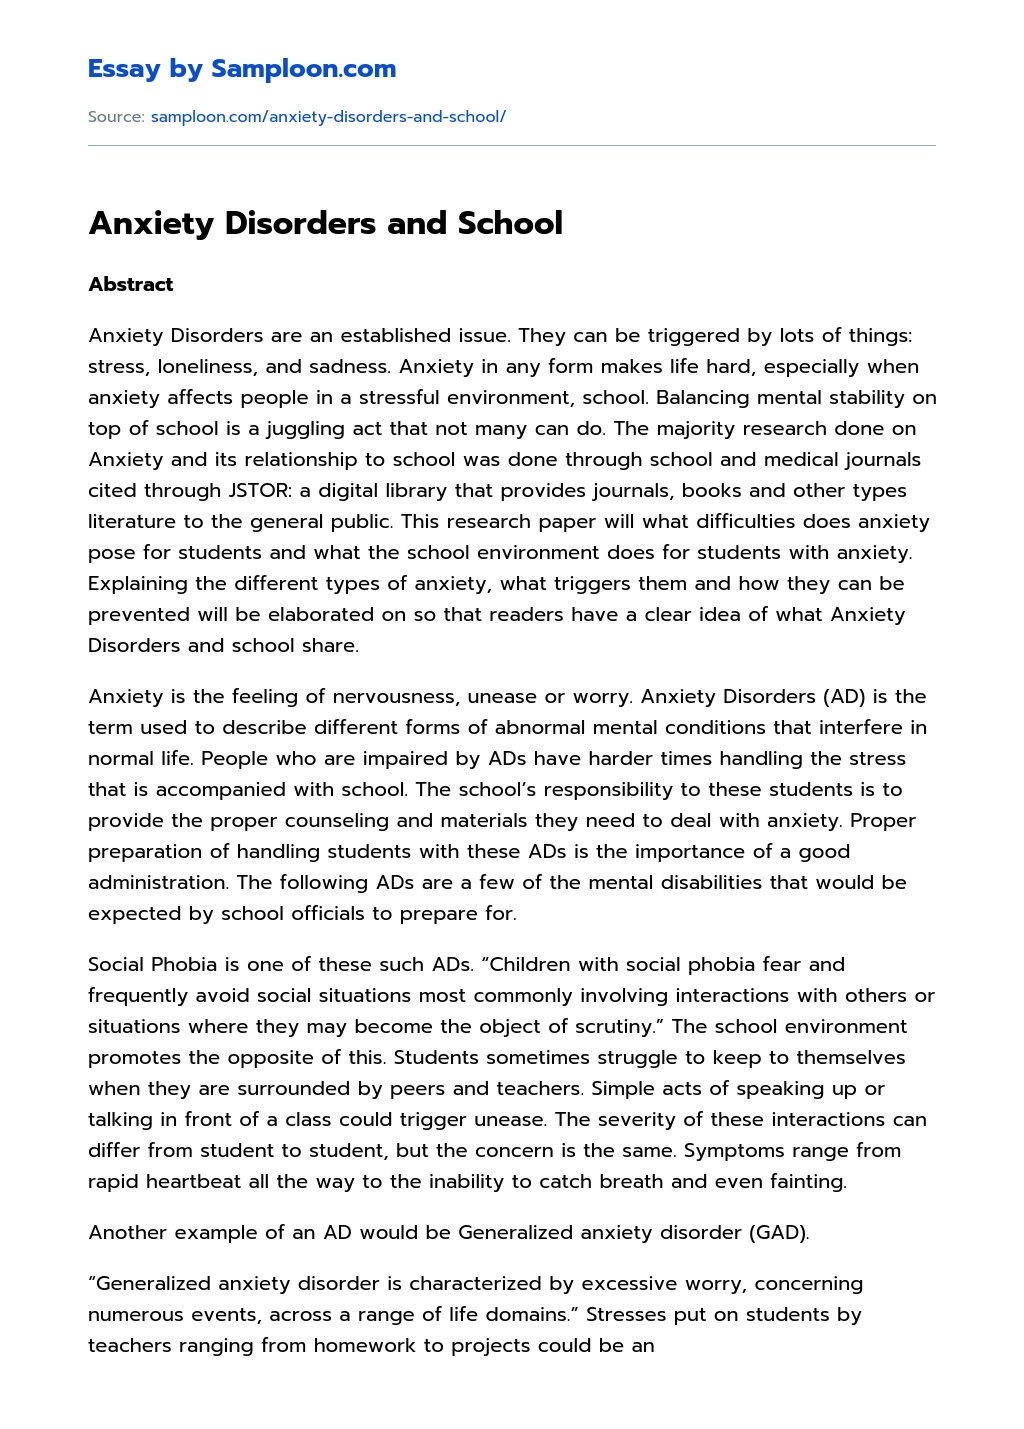 Anxiety Disorders and School essay